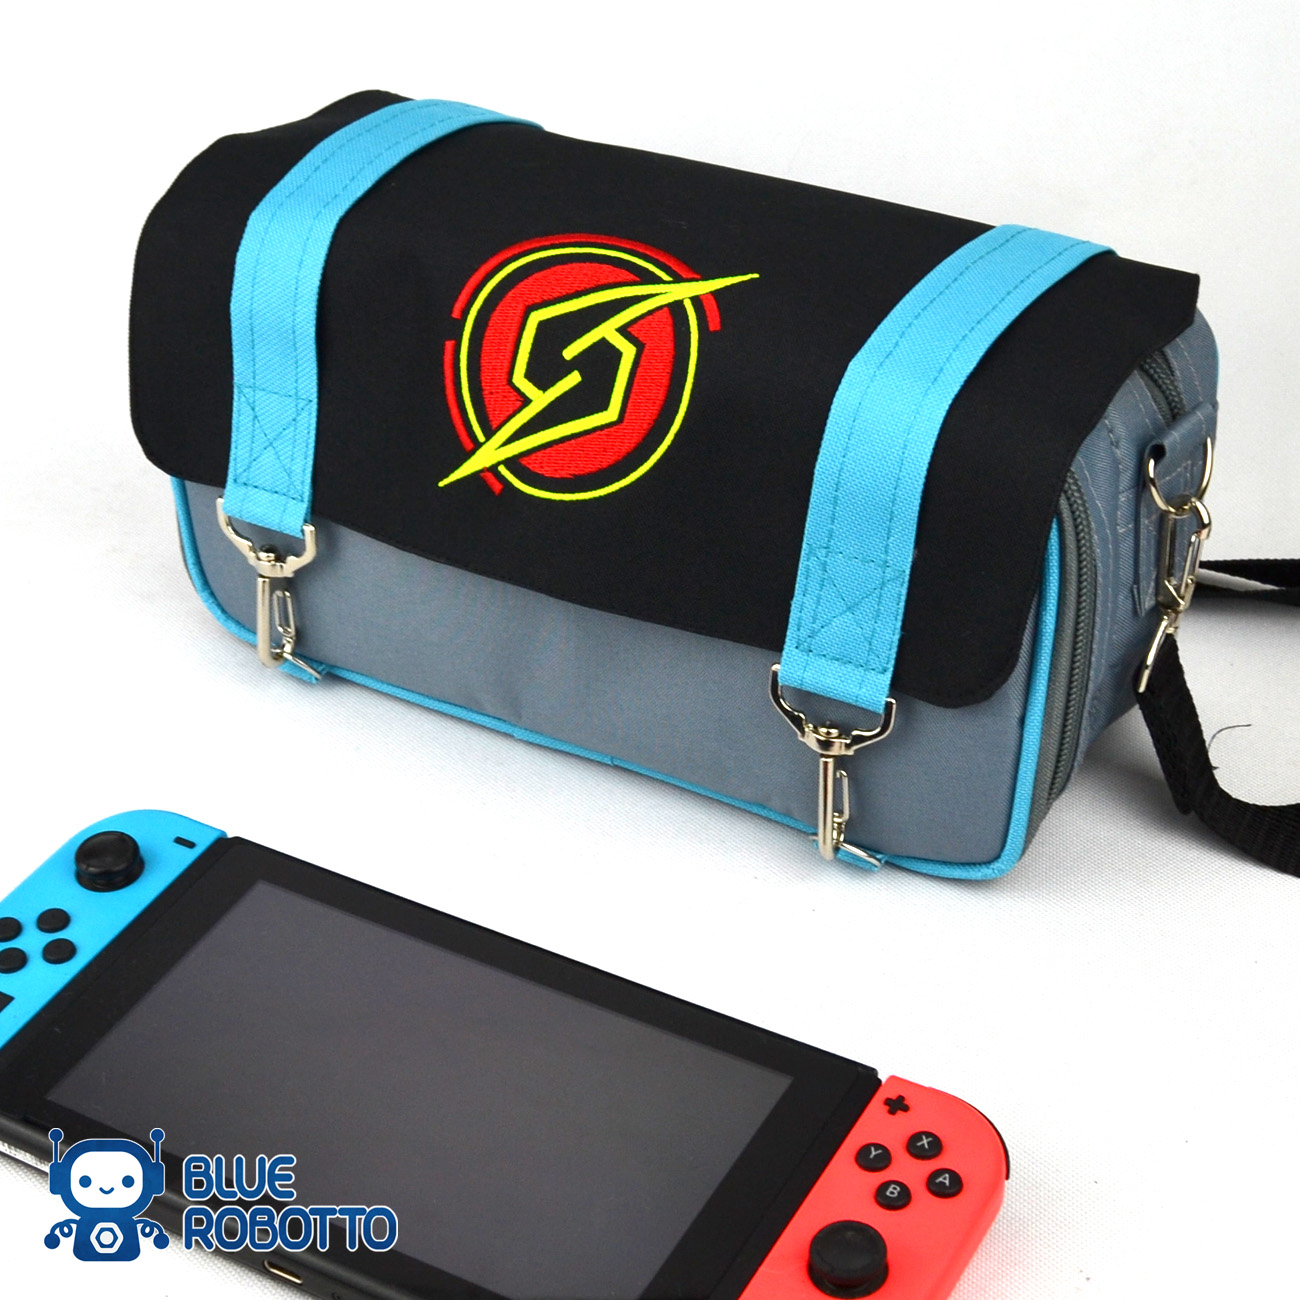 Metroid – Nintendo Switch and accessories bag – Blue Robotto